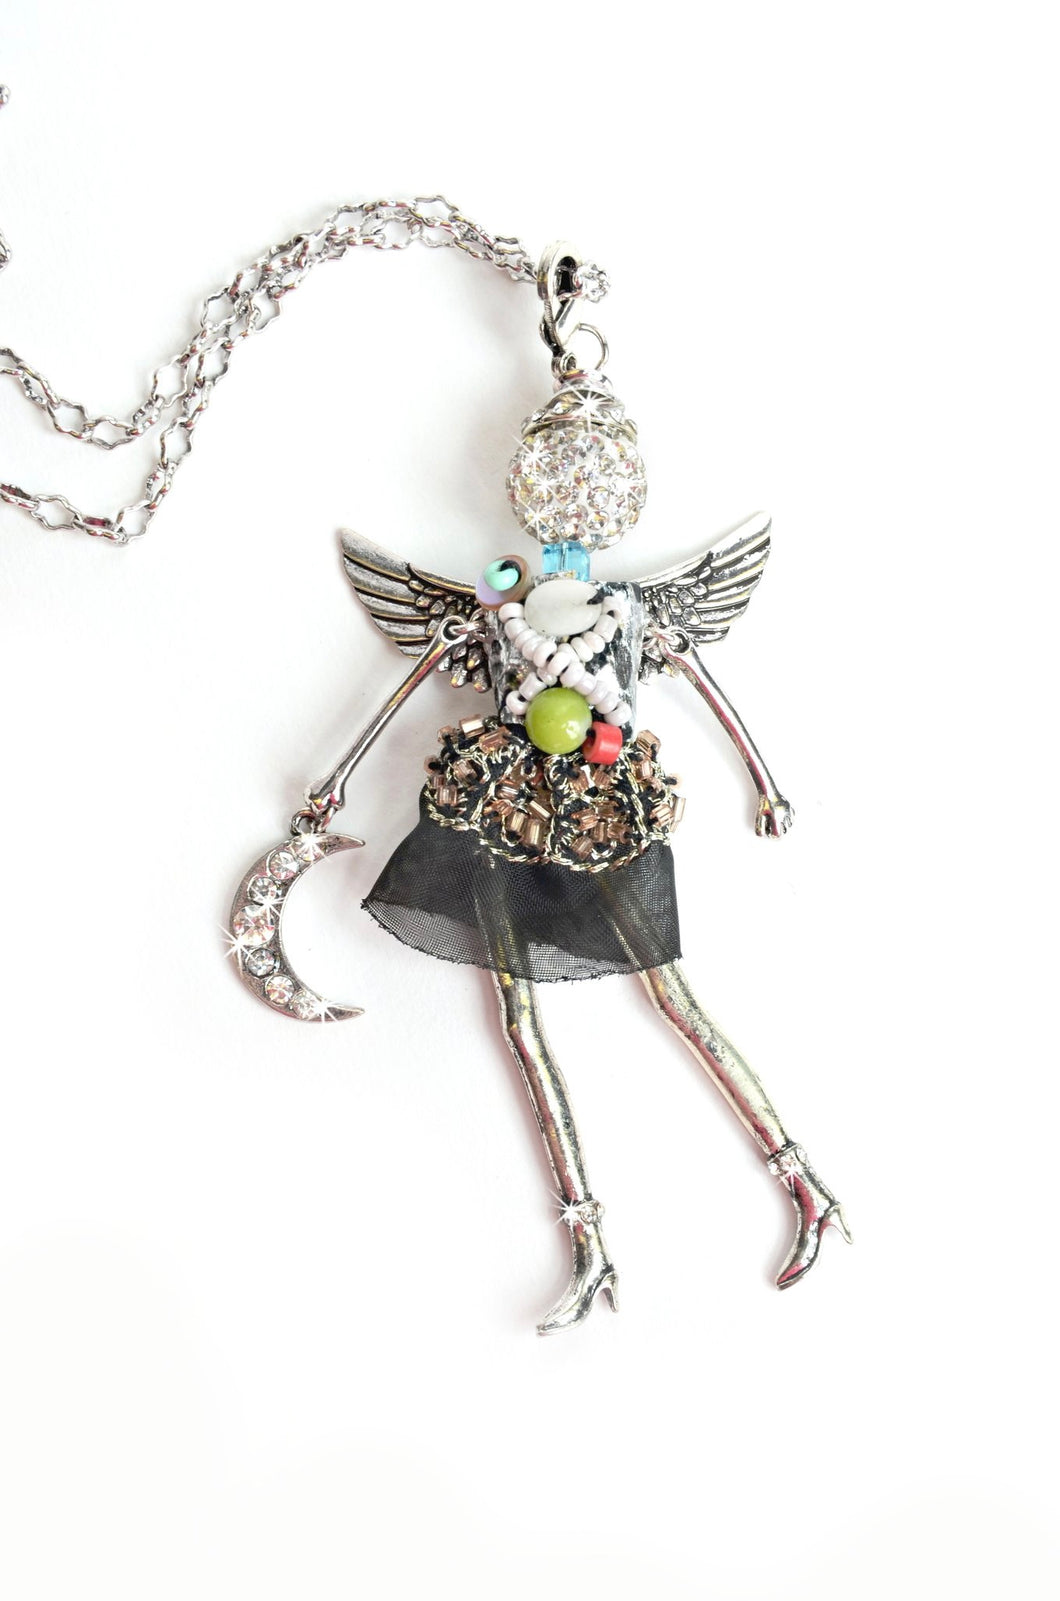 JUST BECAUSE Angel Key Chain And Necklace